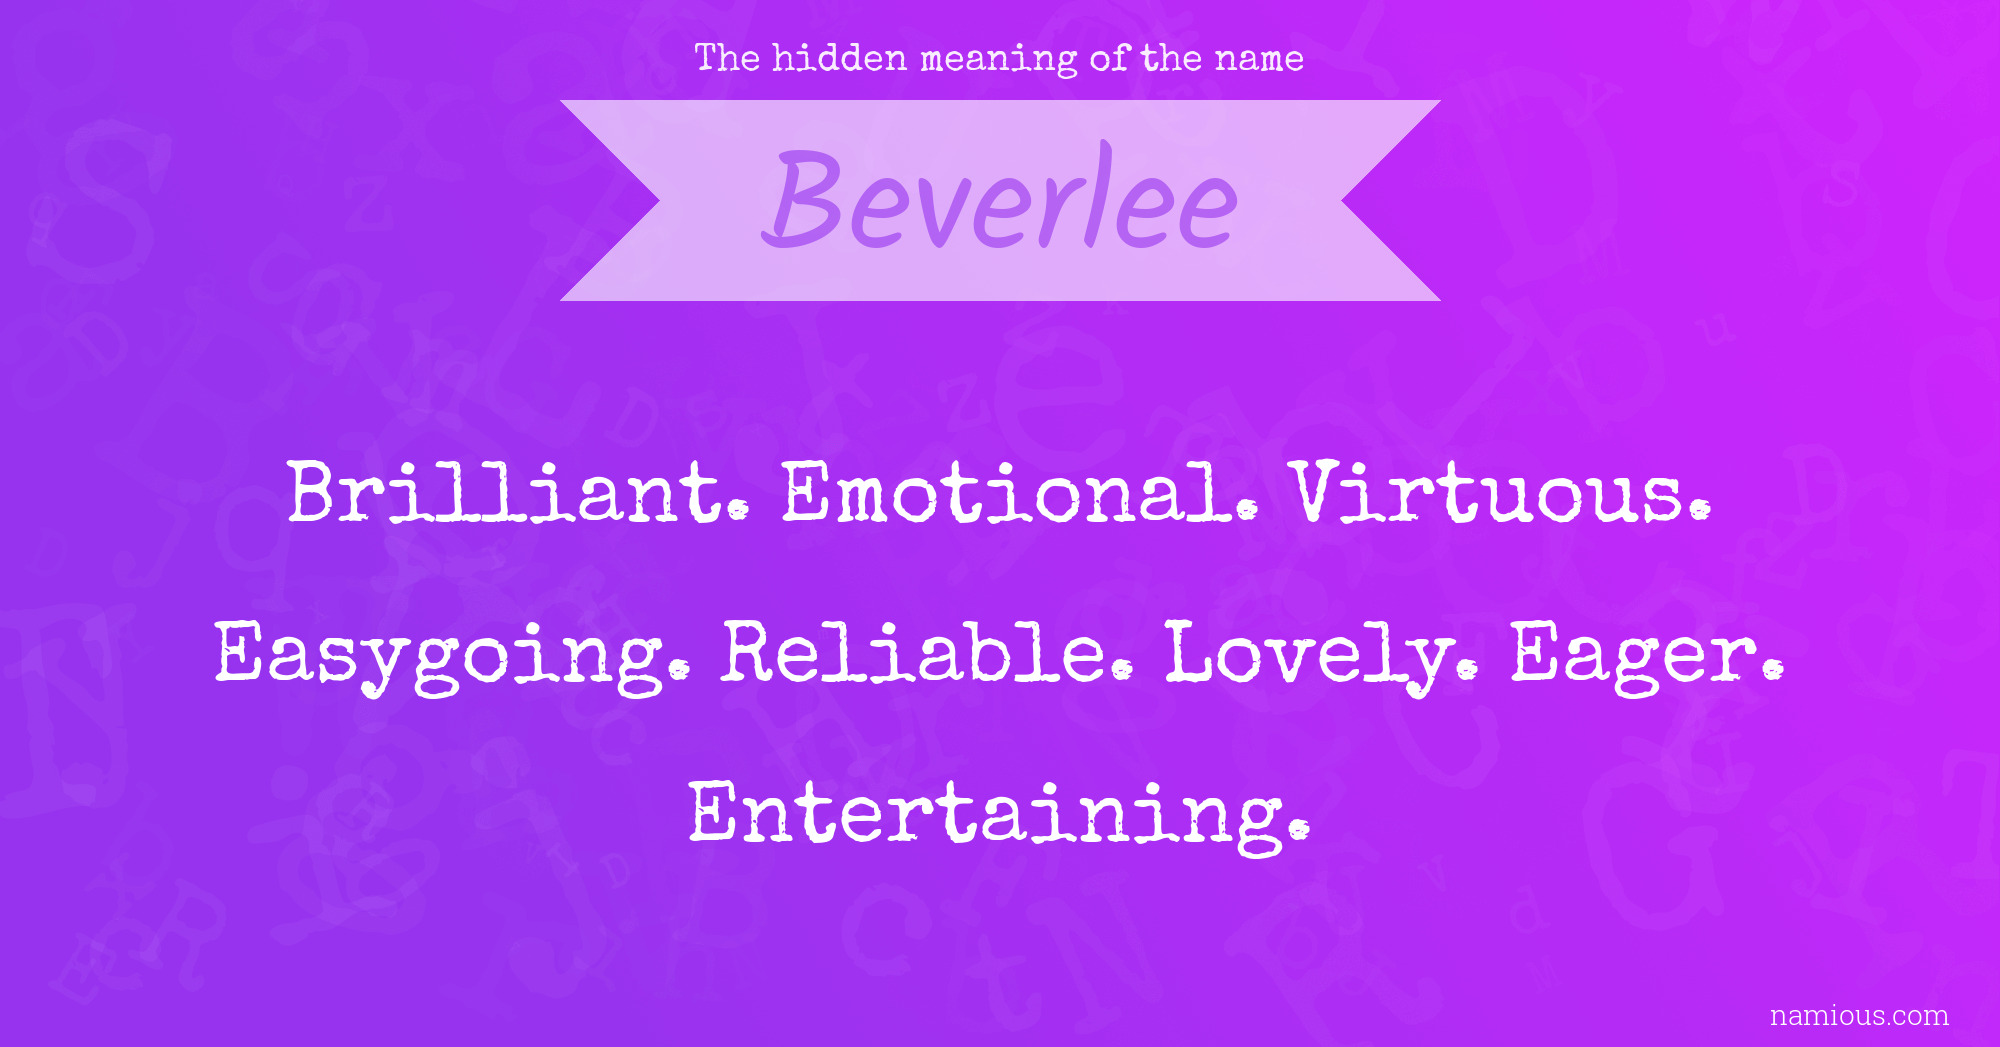 The hidden meaning of the name Beverlee